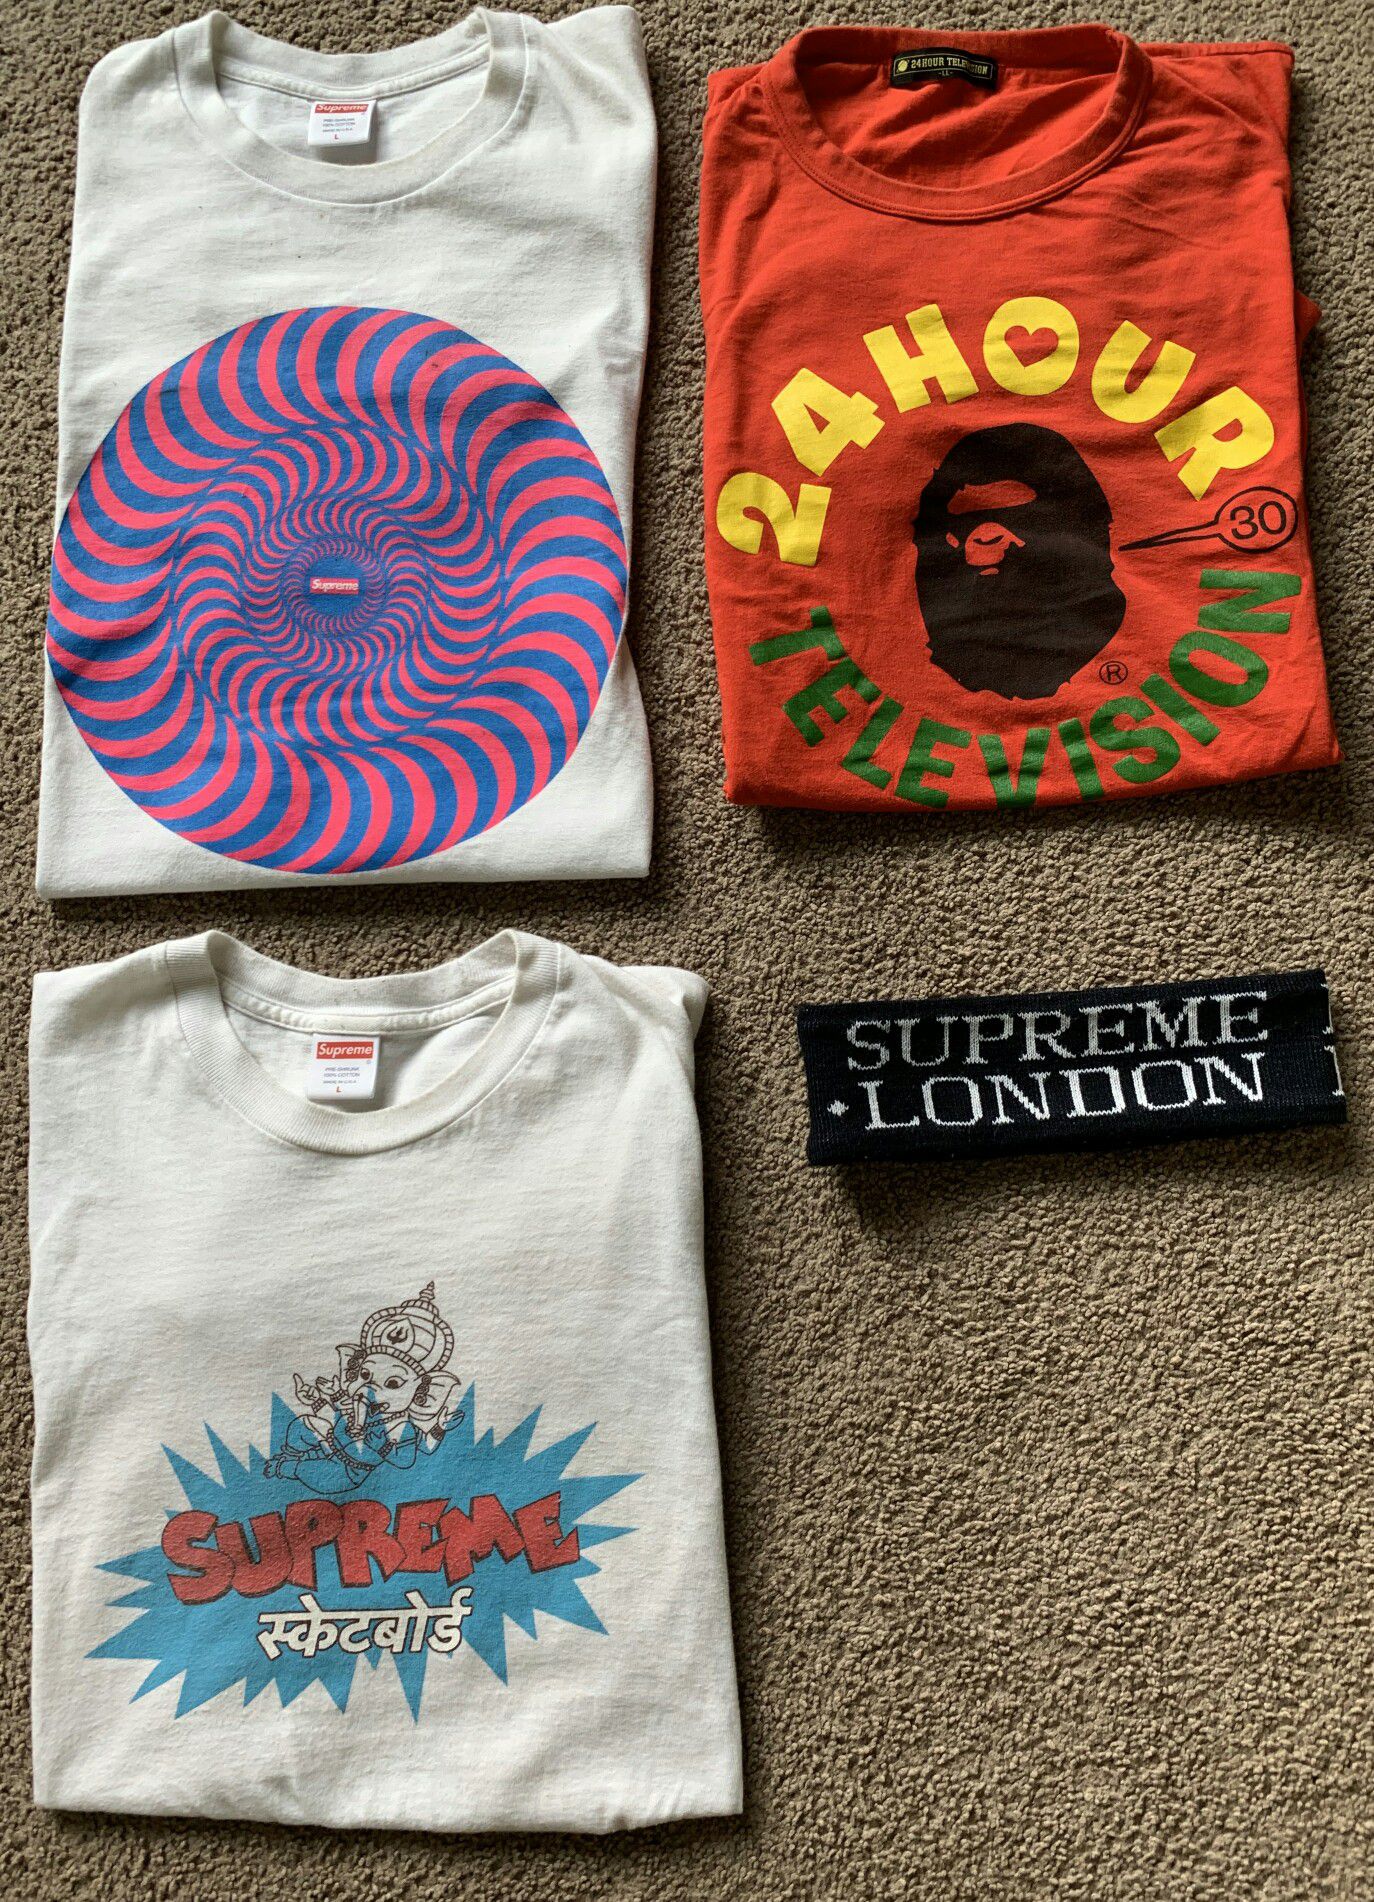 Supreme and Bape Hype clothing and accessories